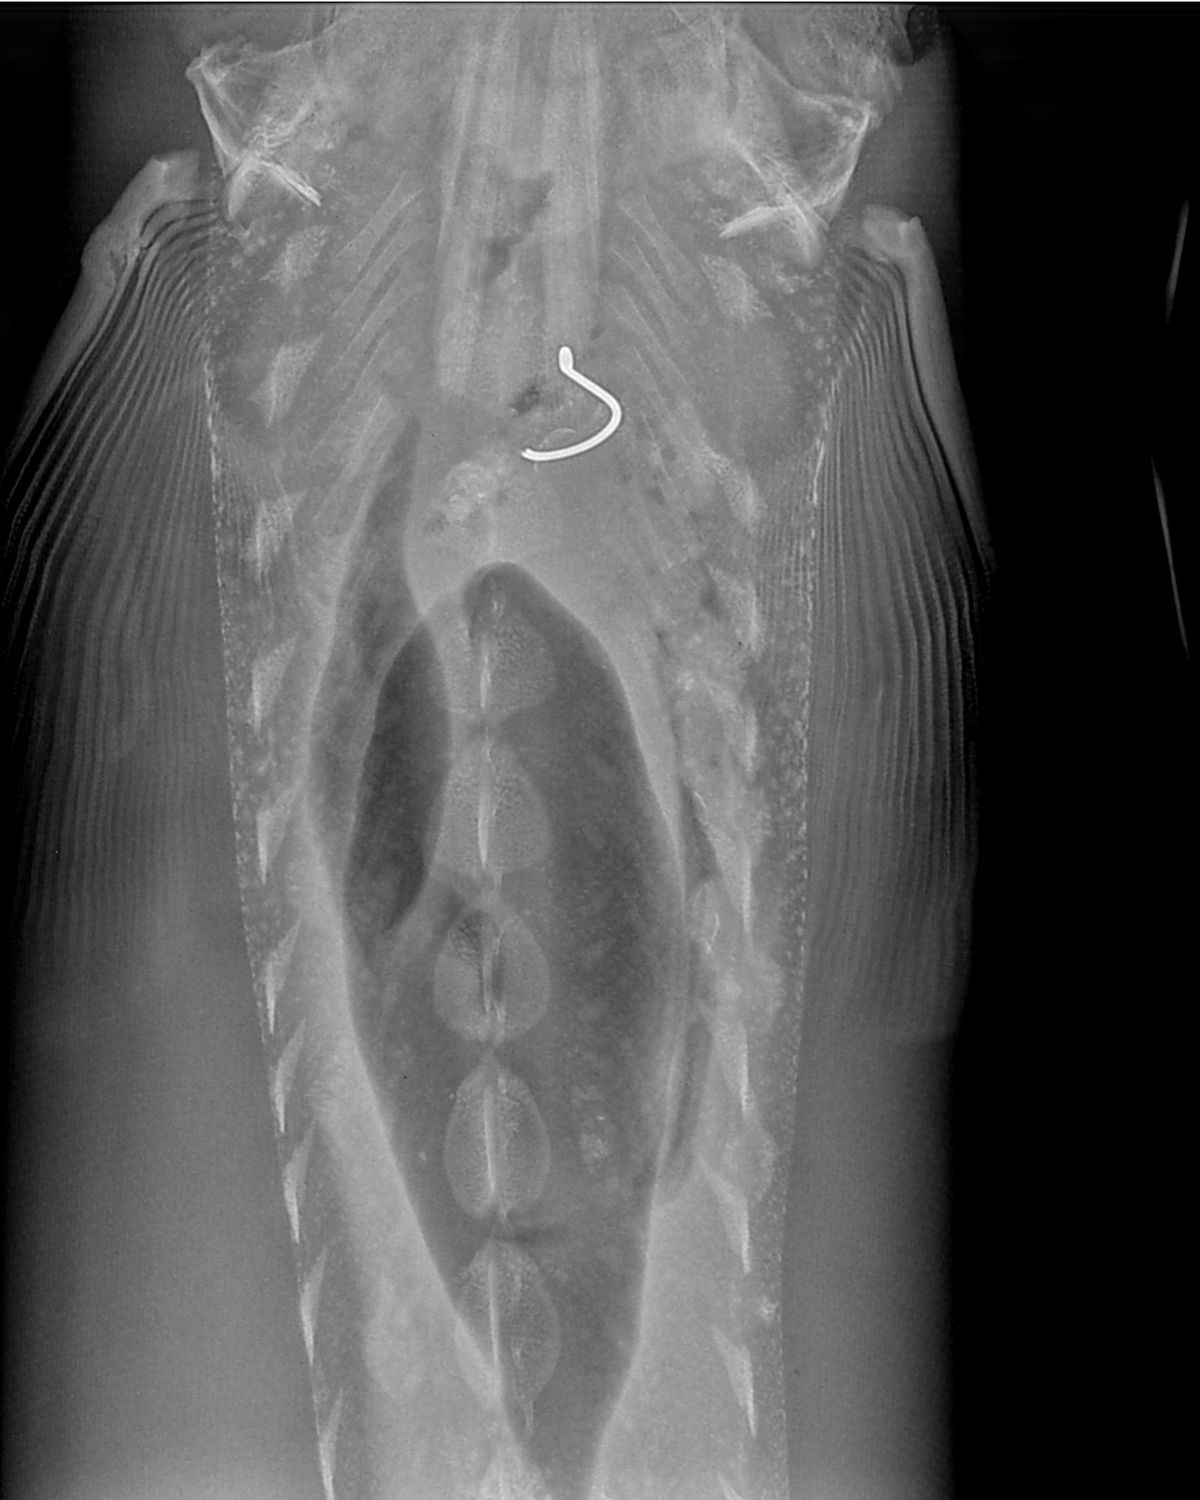 An X-ray image of a sturgeon shows a broken hook in its digestive tract. (Courtesy)